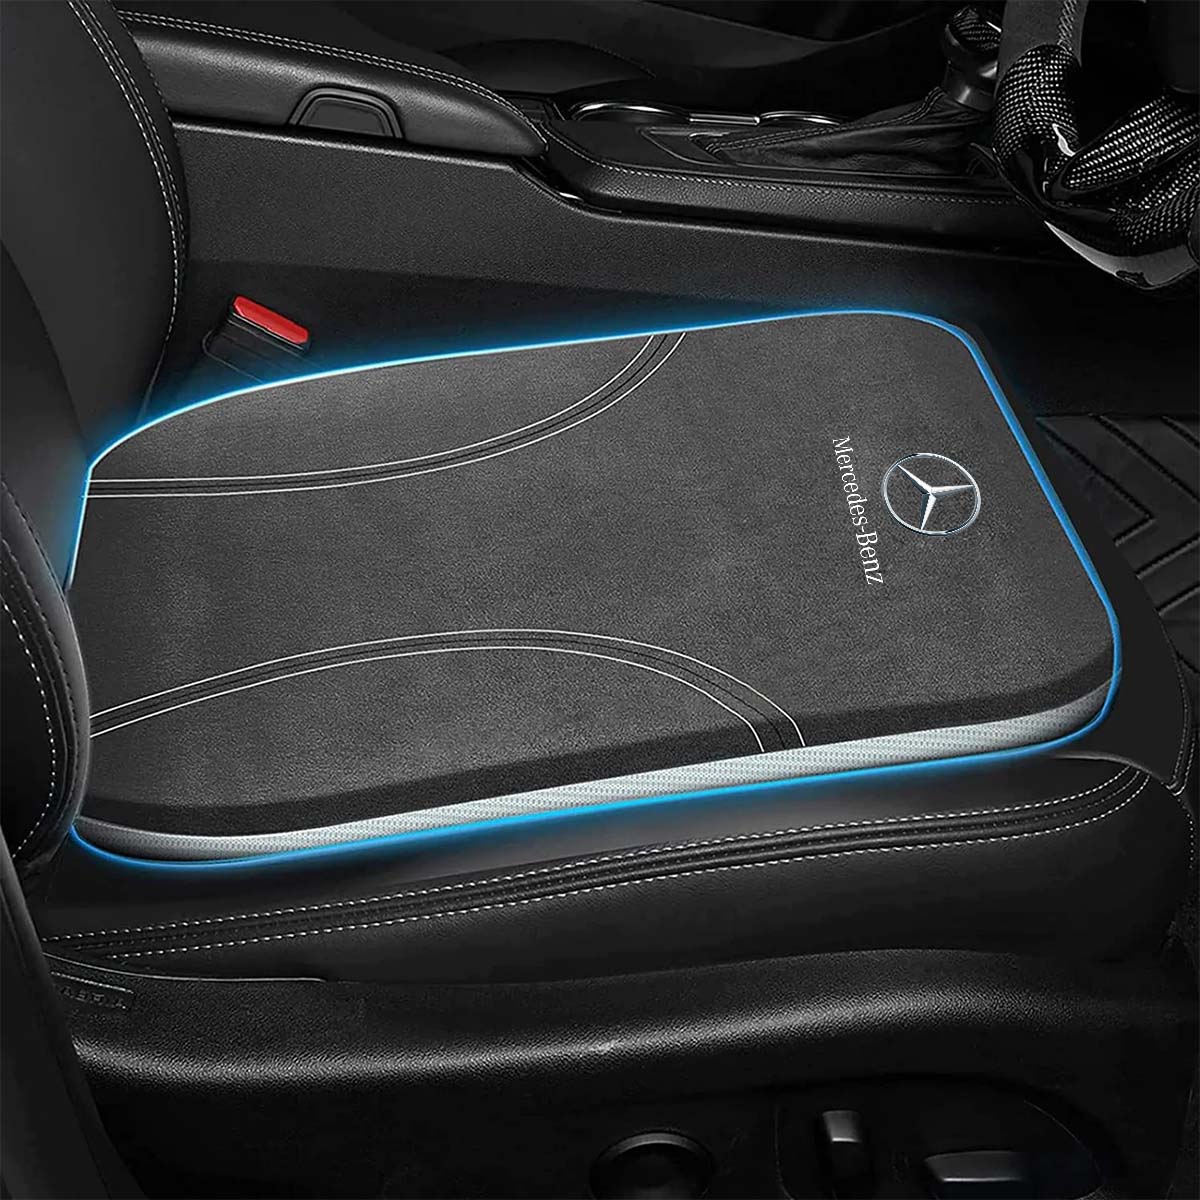 Mercedes Benz Car Seat Cushion: Enhance Comfort and Support for Your Drive